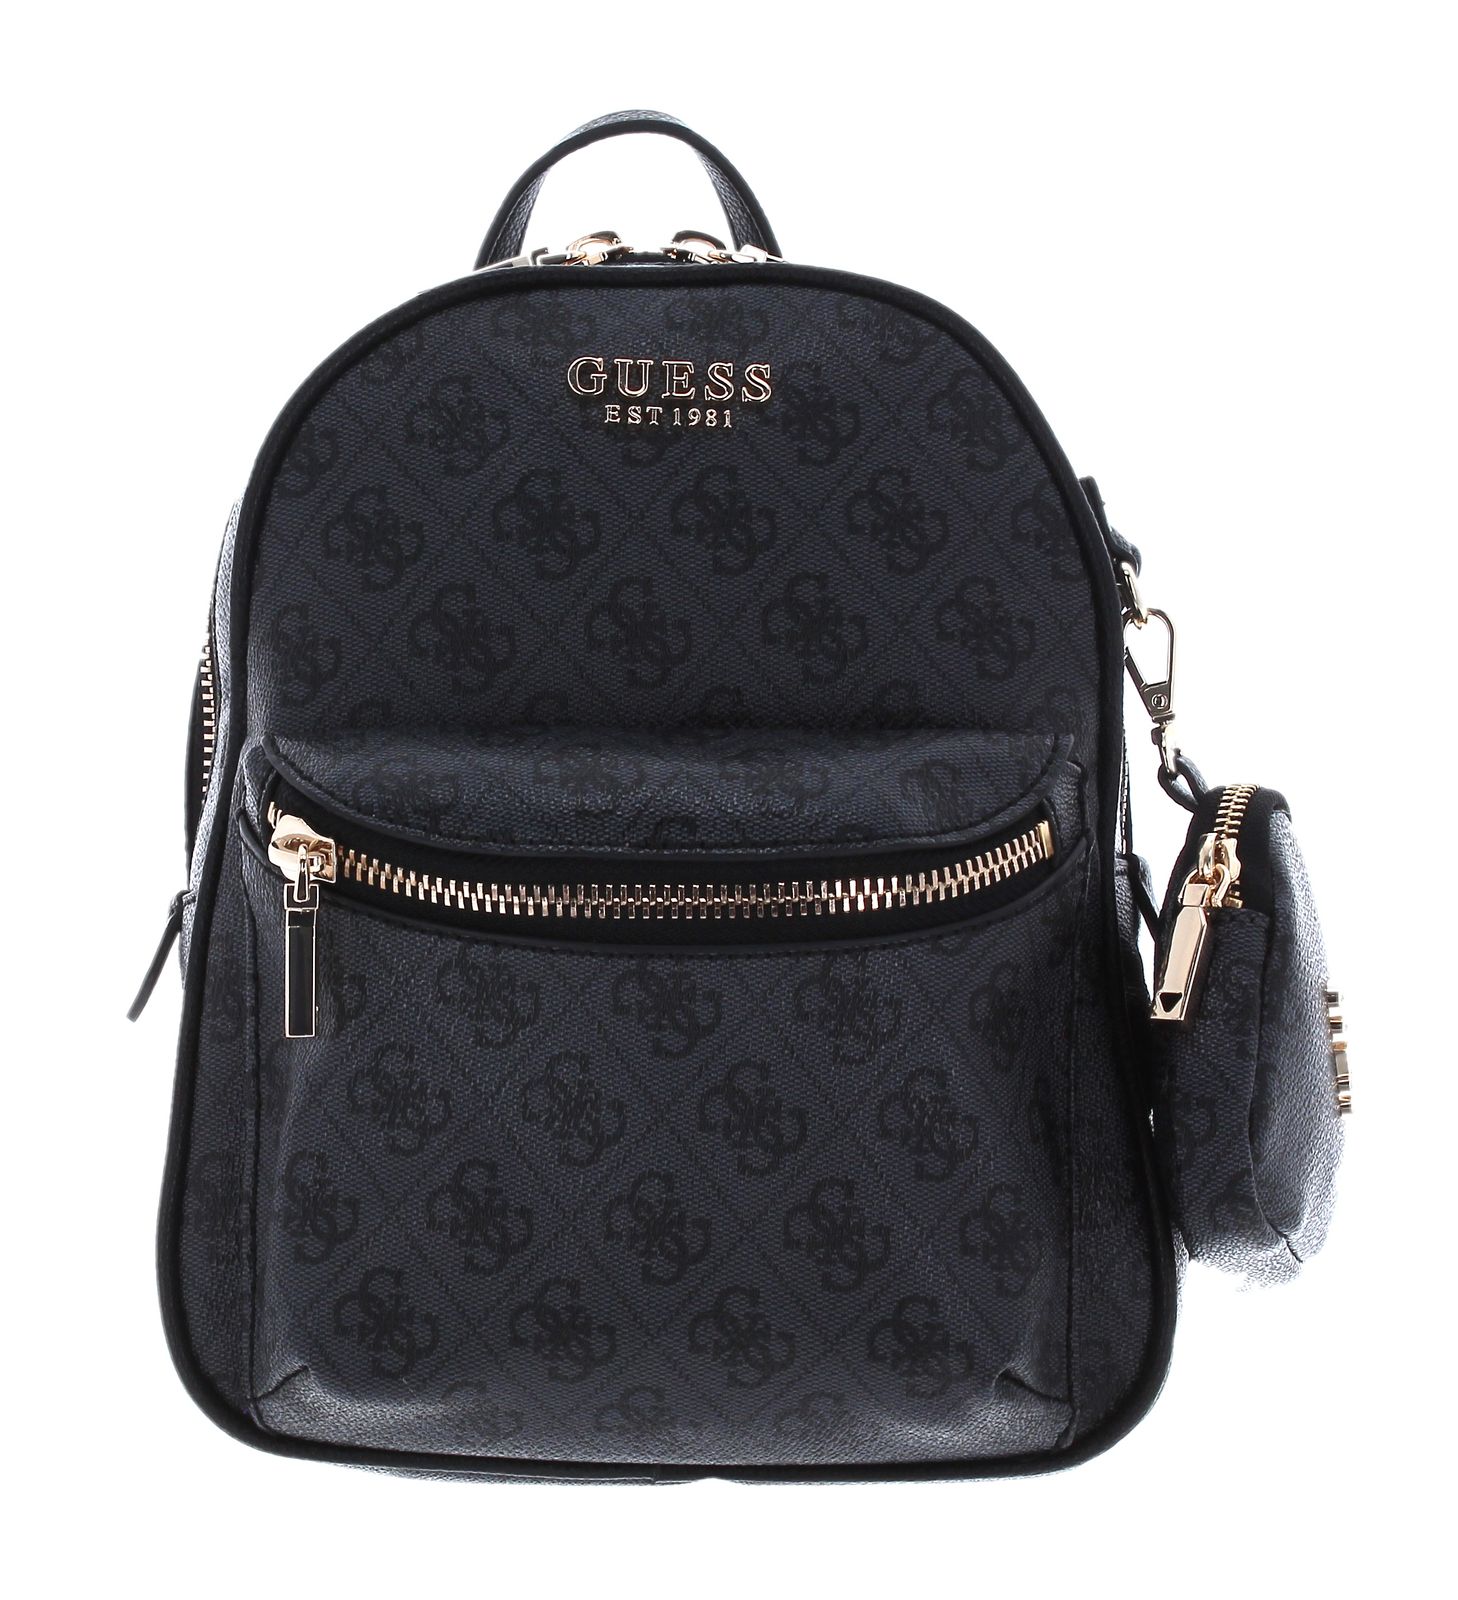 GUESS backpack House Party Backpack Coal Logo | Buy bags, purses ...